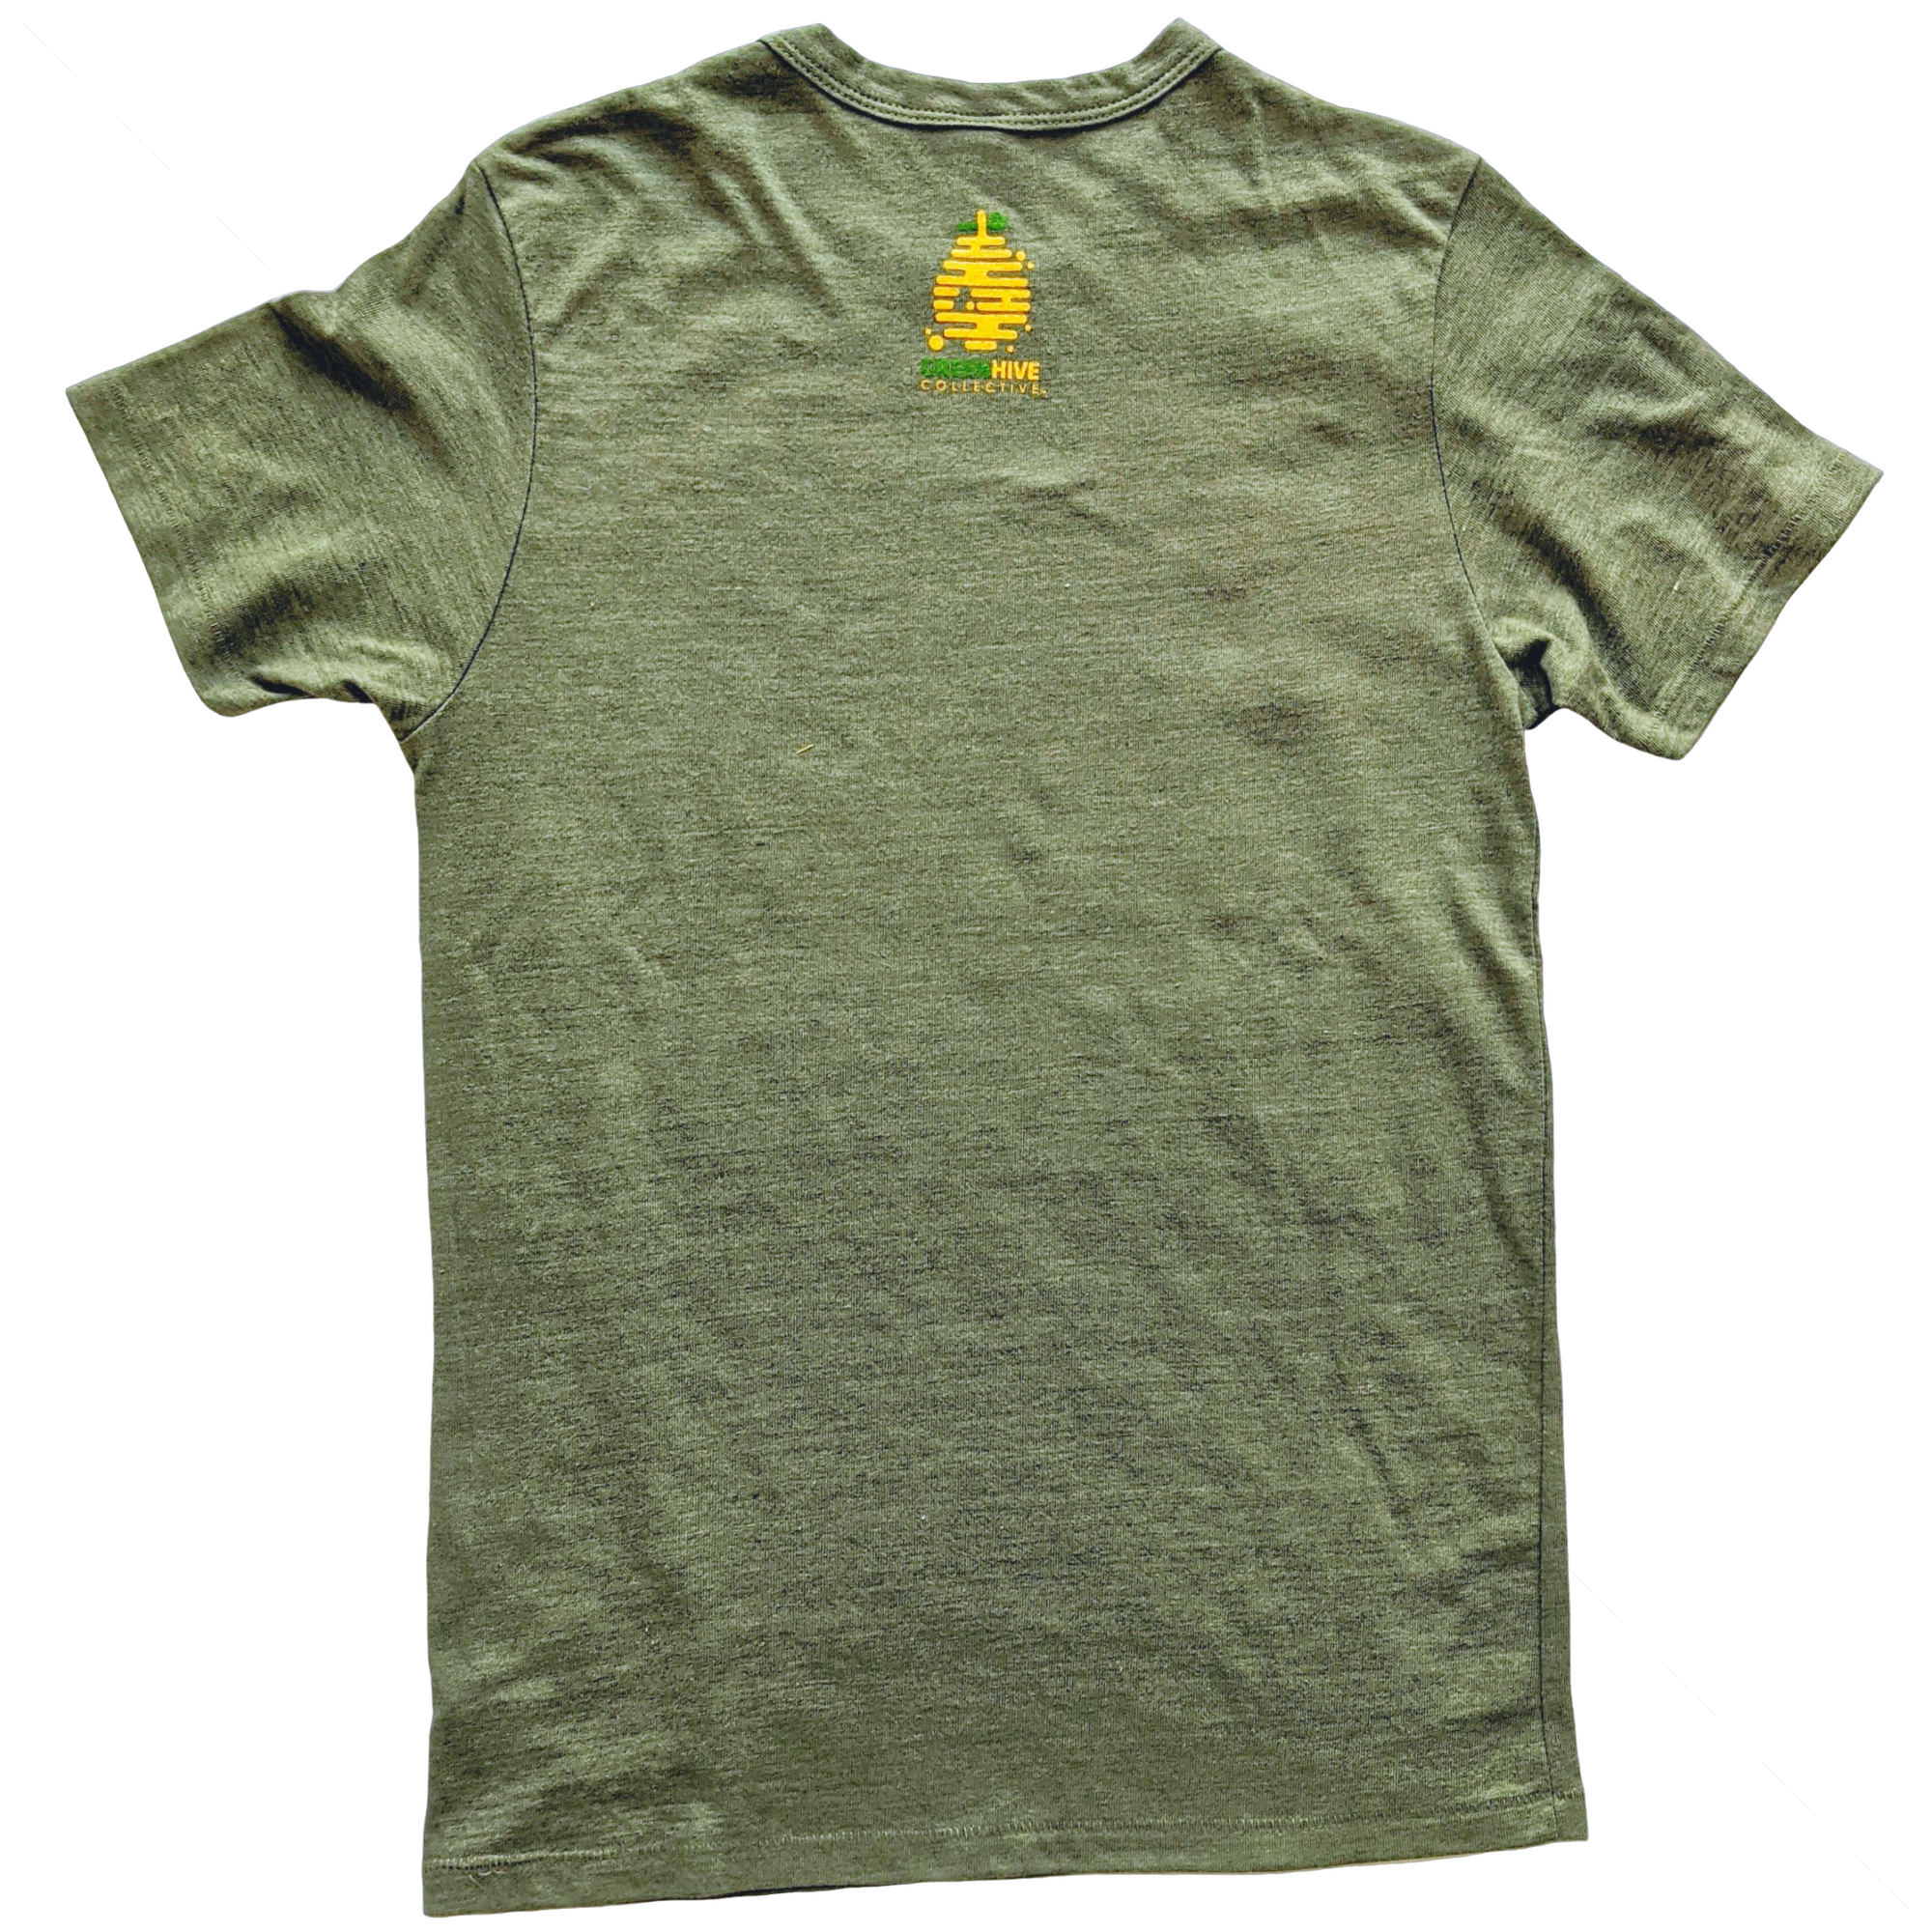 Tree Hugs - GreenHive Collective - ECO-FRIENDLY APPAREL